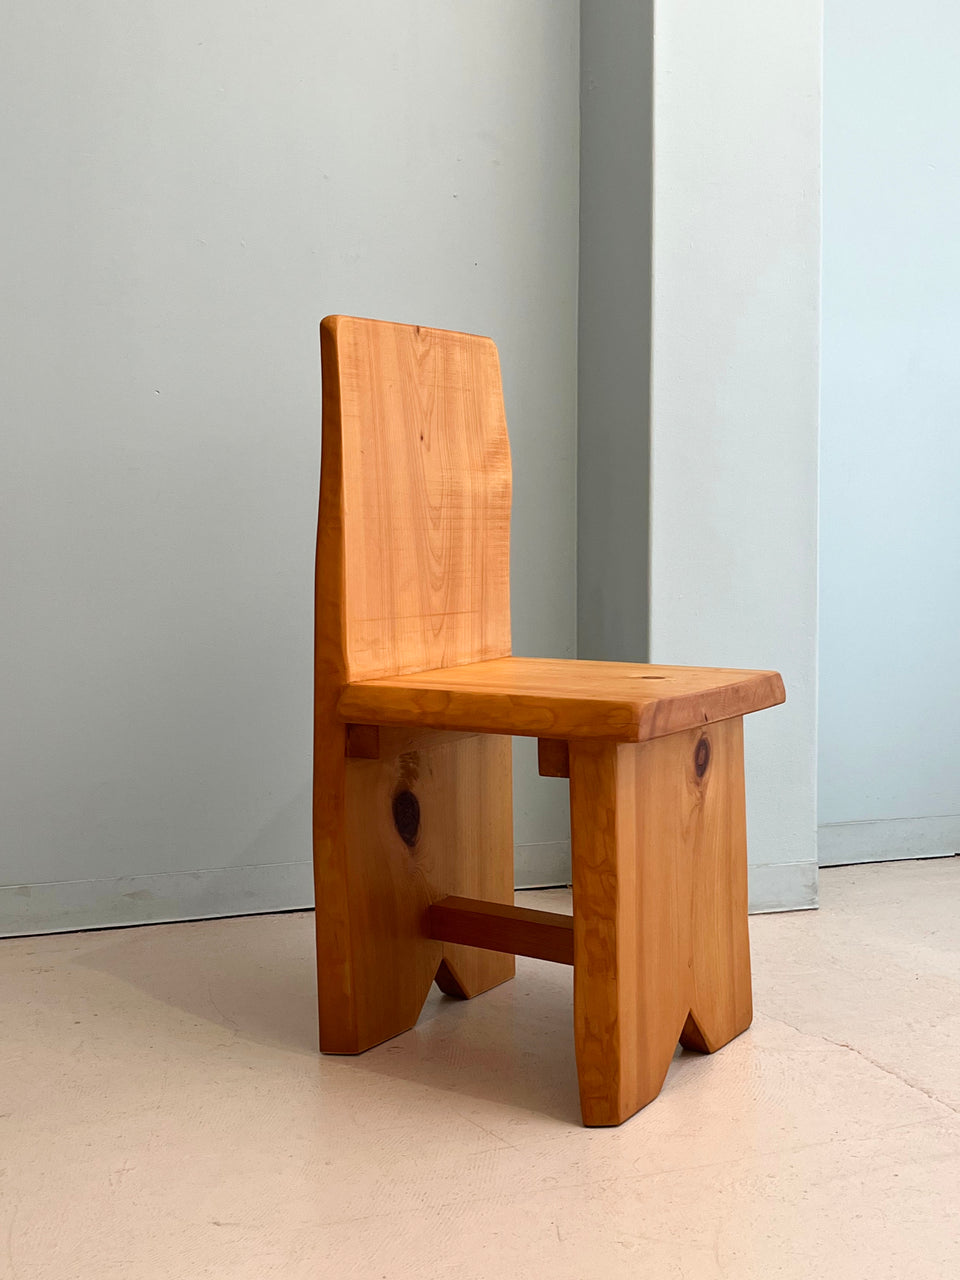 Solid Wood Chair/無垢材 チェア 椅子 飾り台